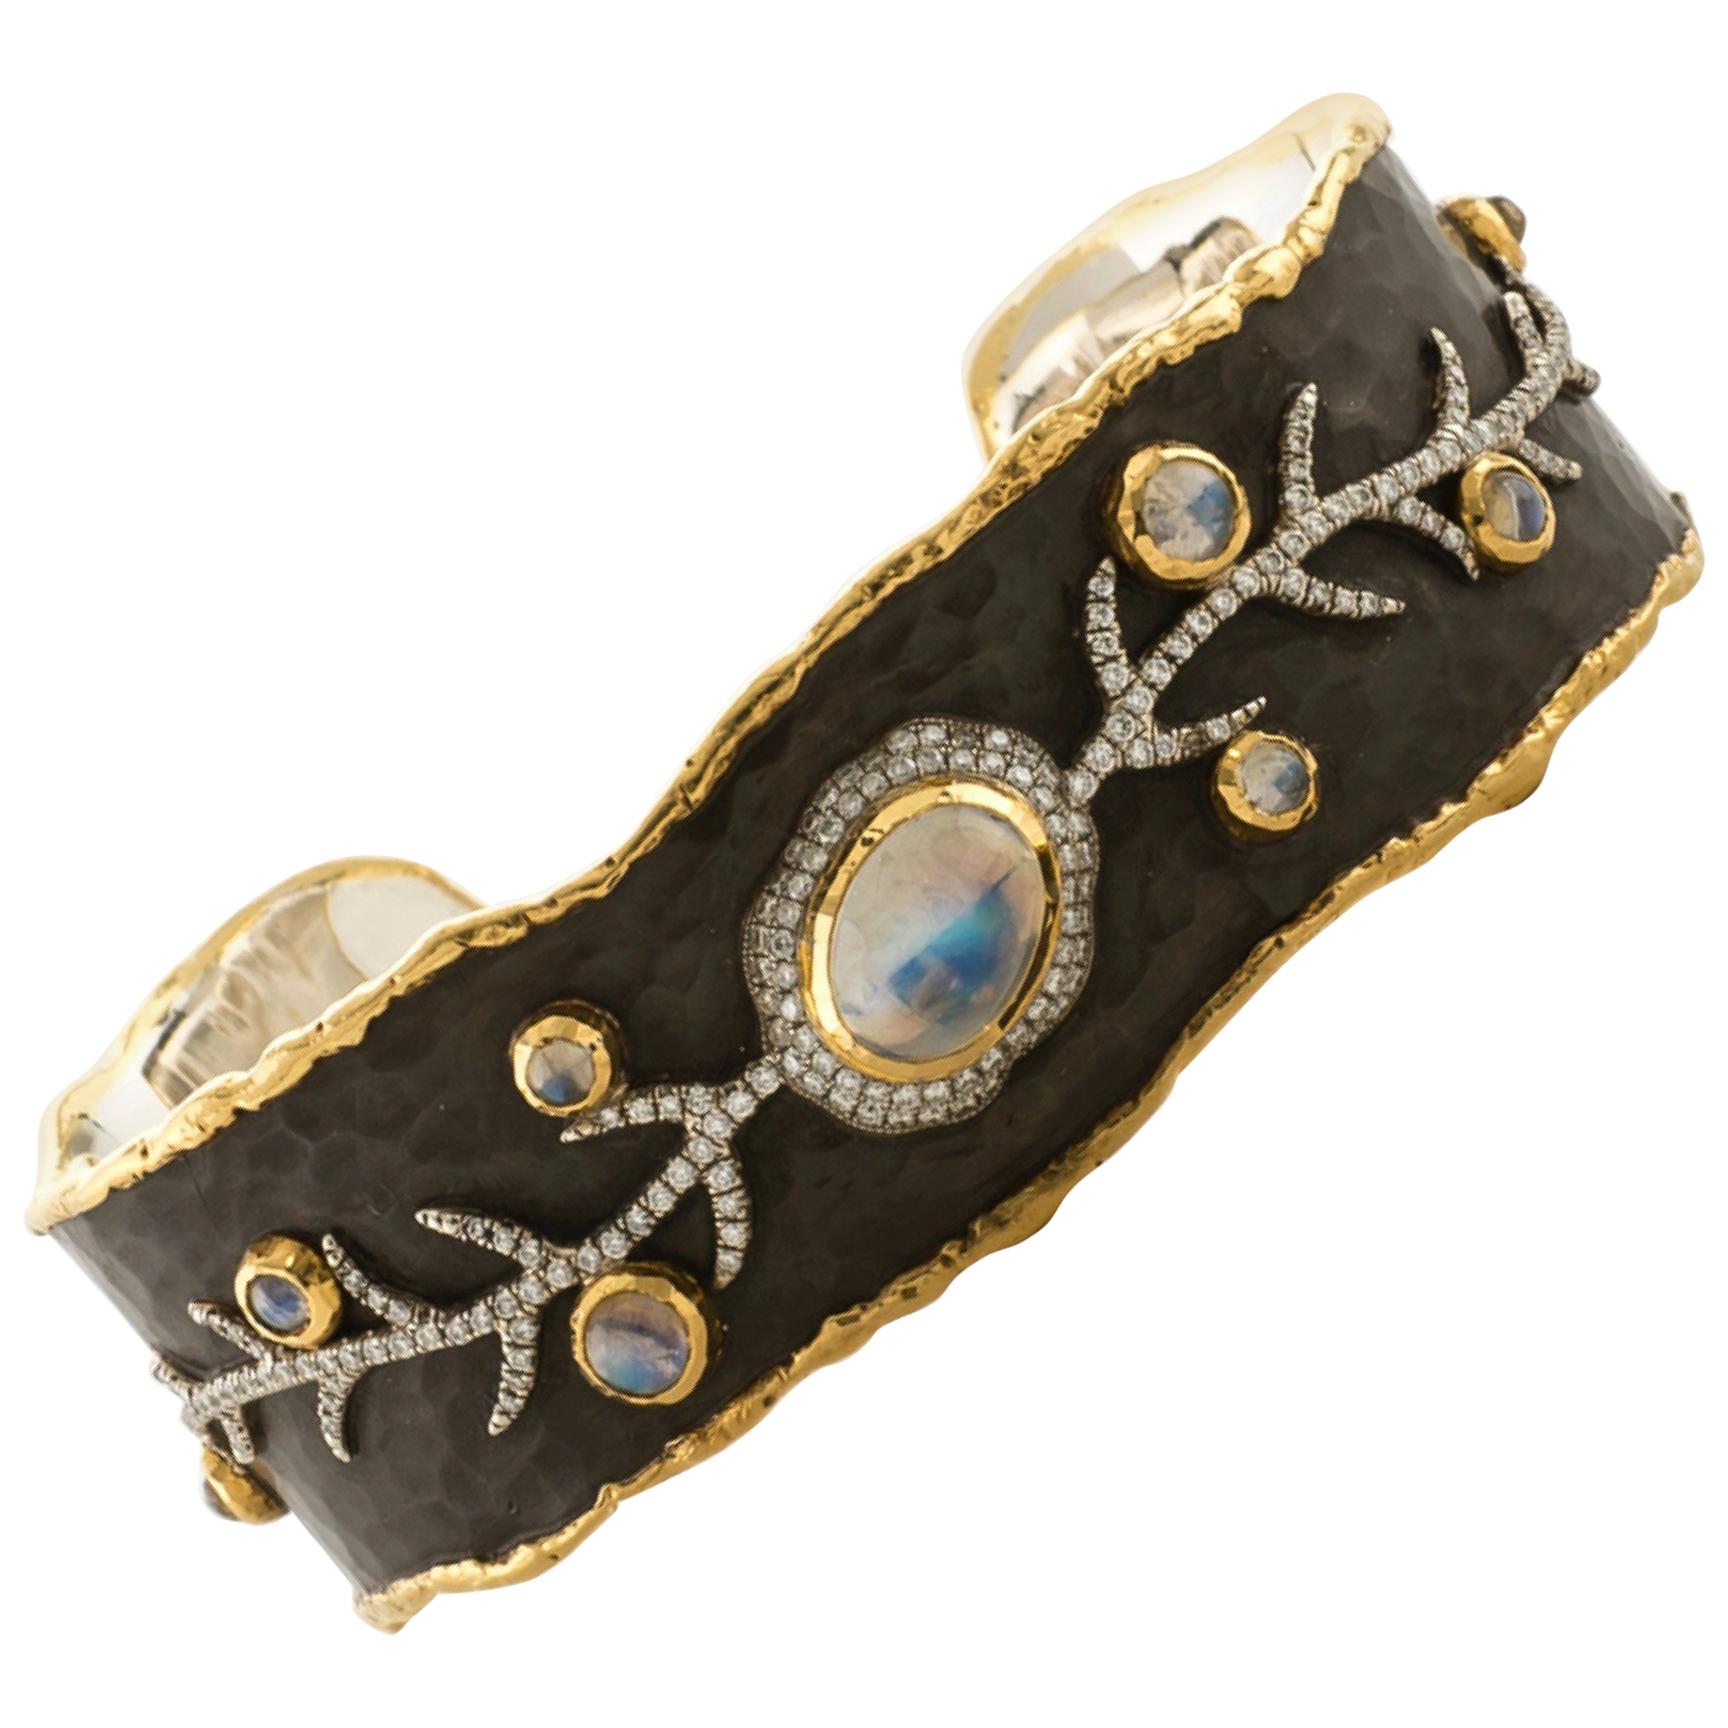 Victor Velyan 24K Yellow Gold Cuff with Moonstone and Diamonds 